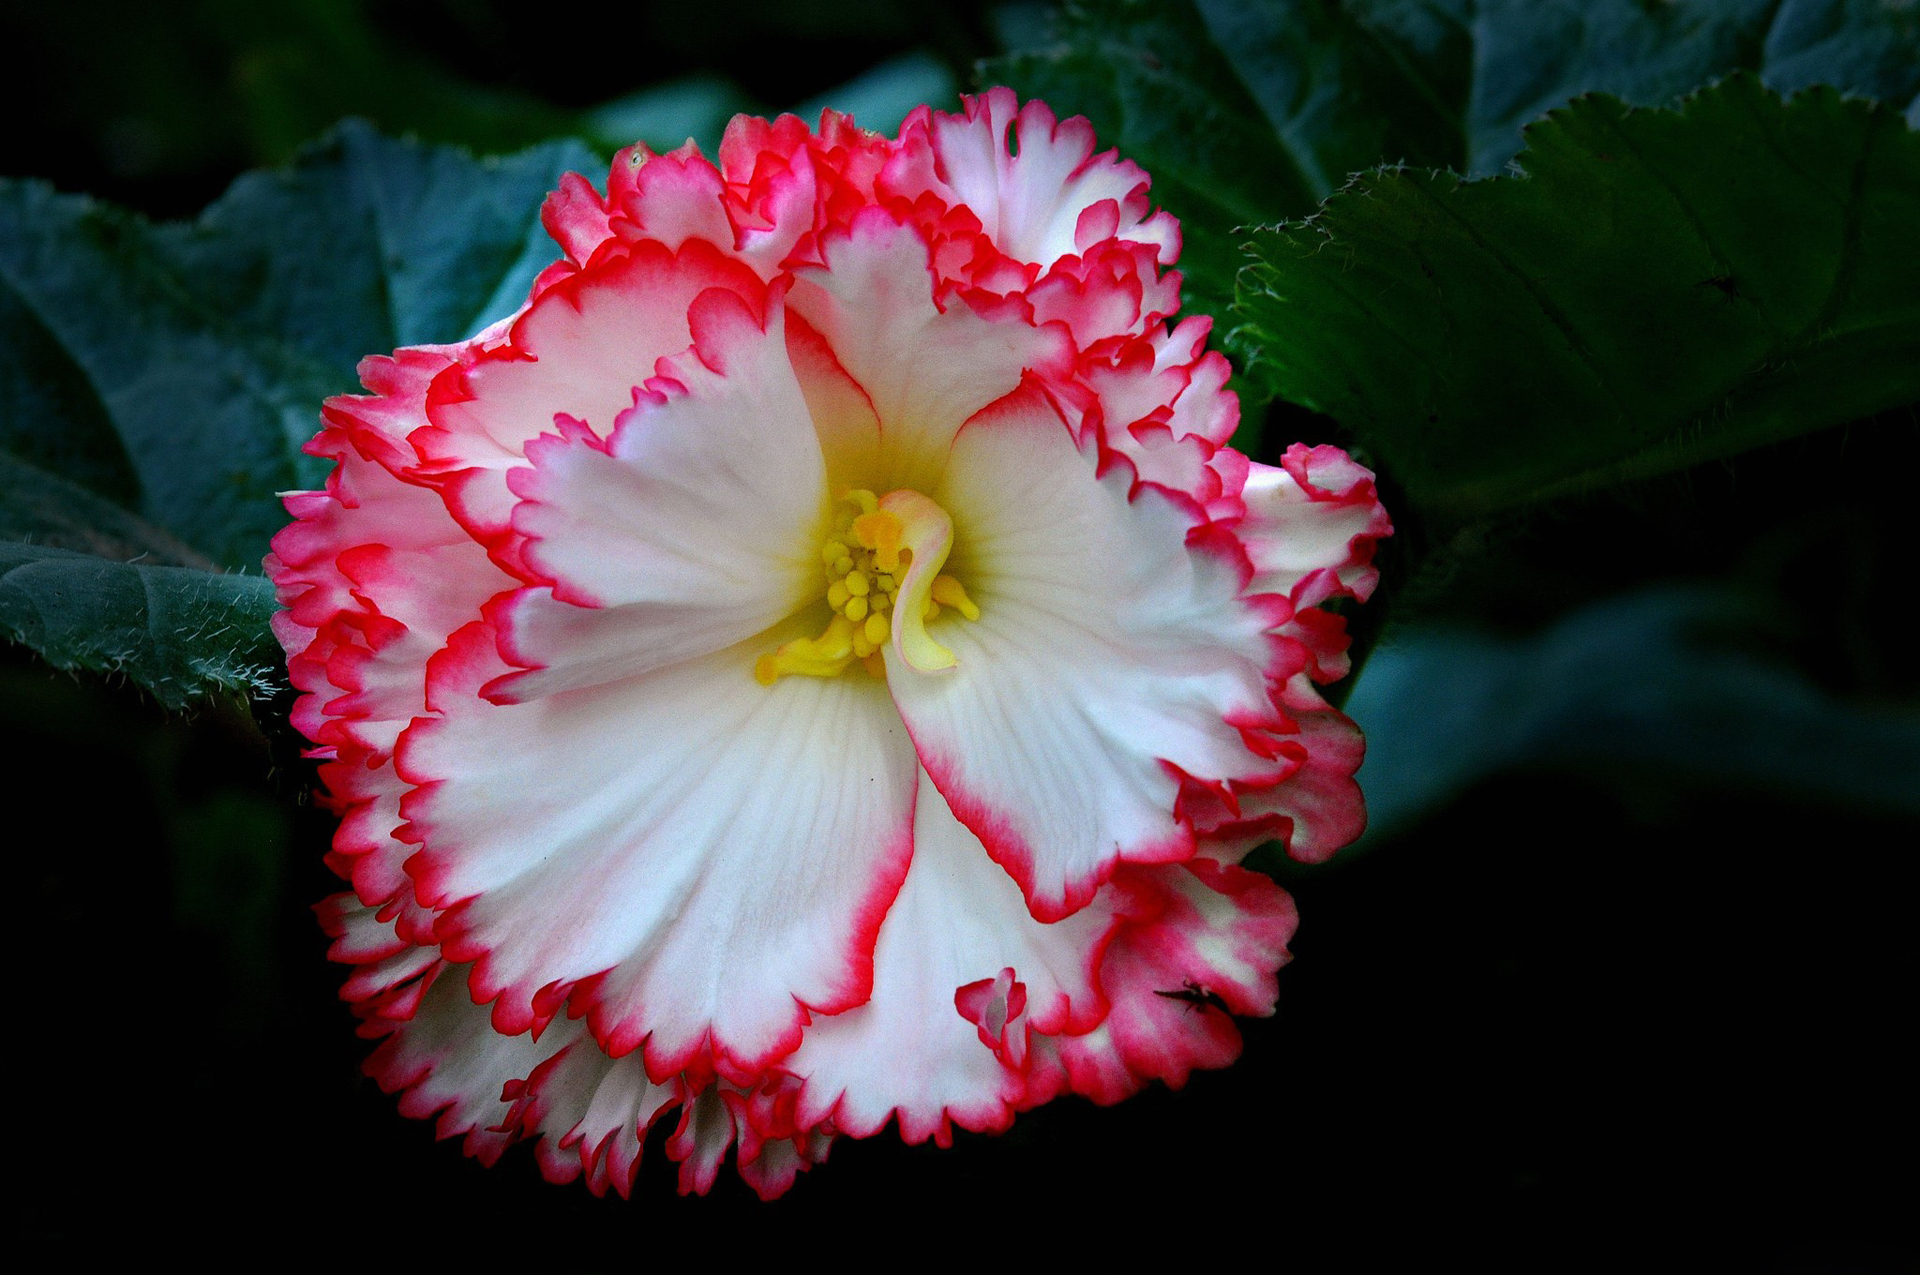 Begonia Close Up Earth Flower Pink White 1920x1275